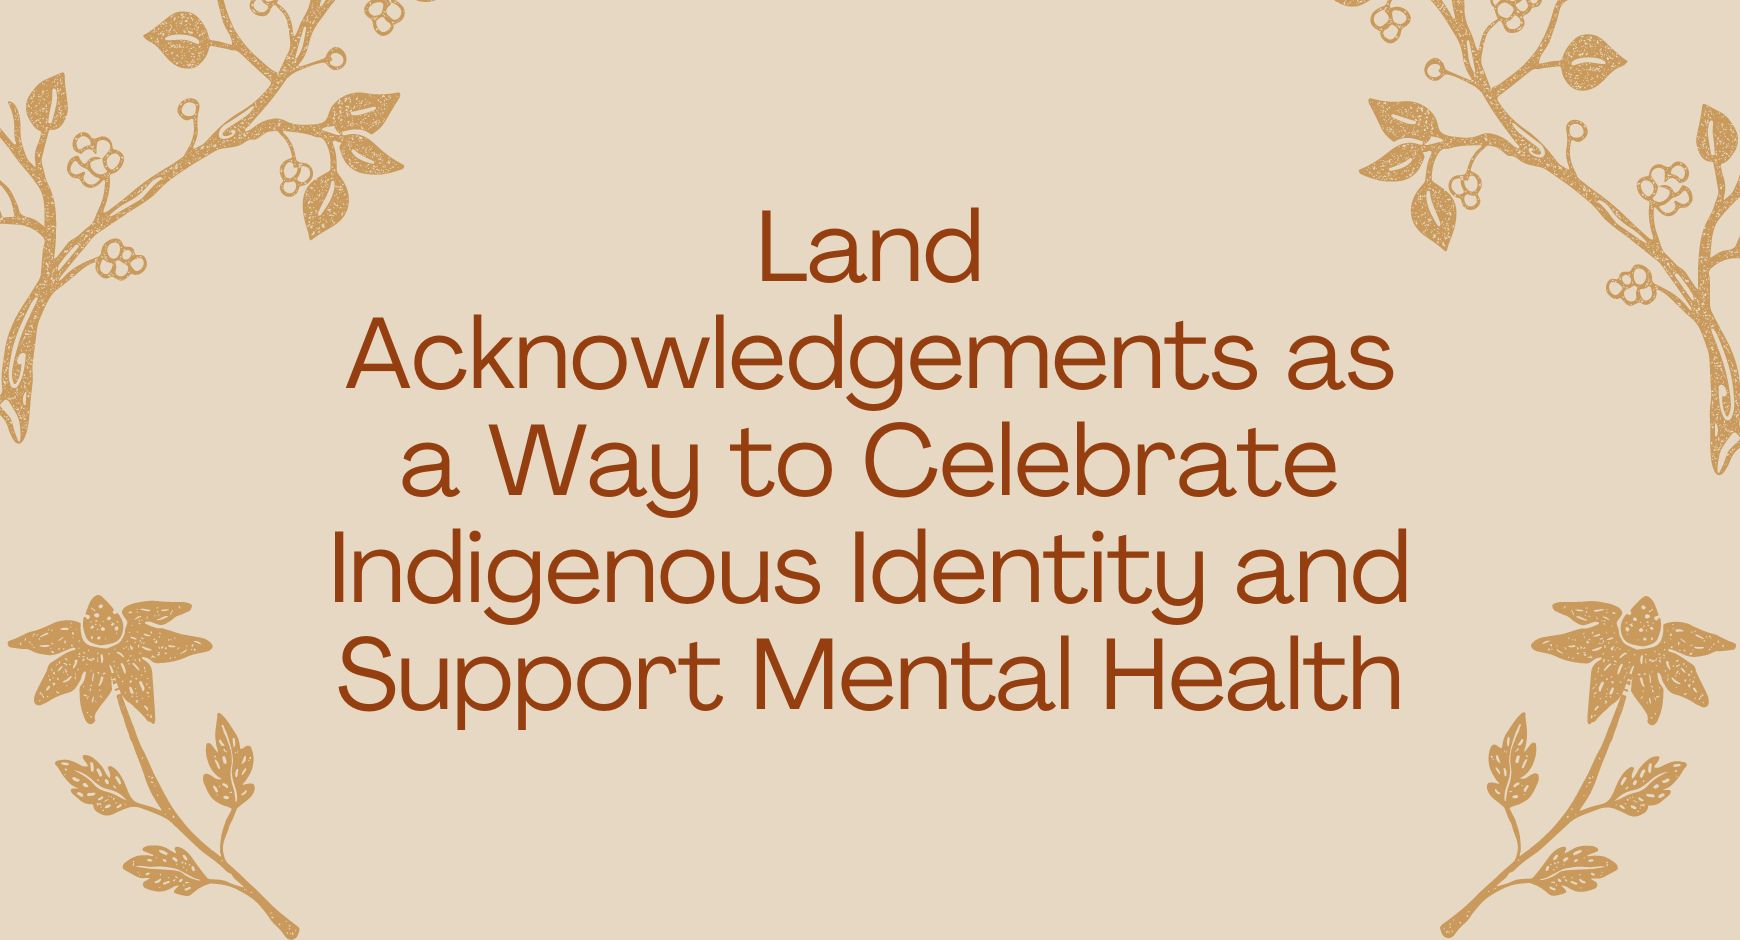 Words that read "Land Acknowledgements as a Way to Celebrate Indigenous Identity and Support Mental Health" surrounded by tan plants.